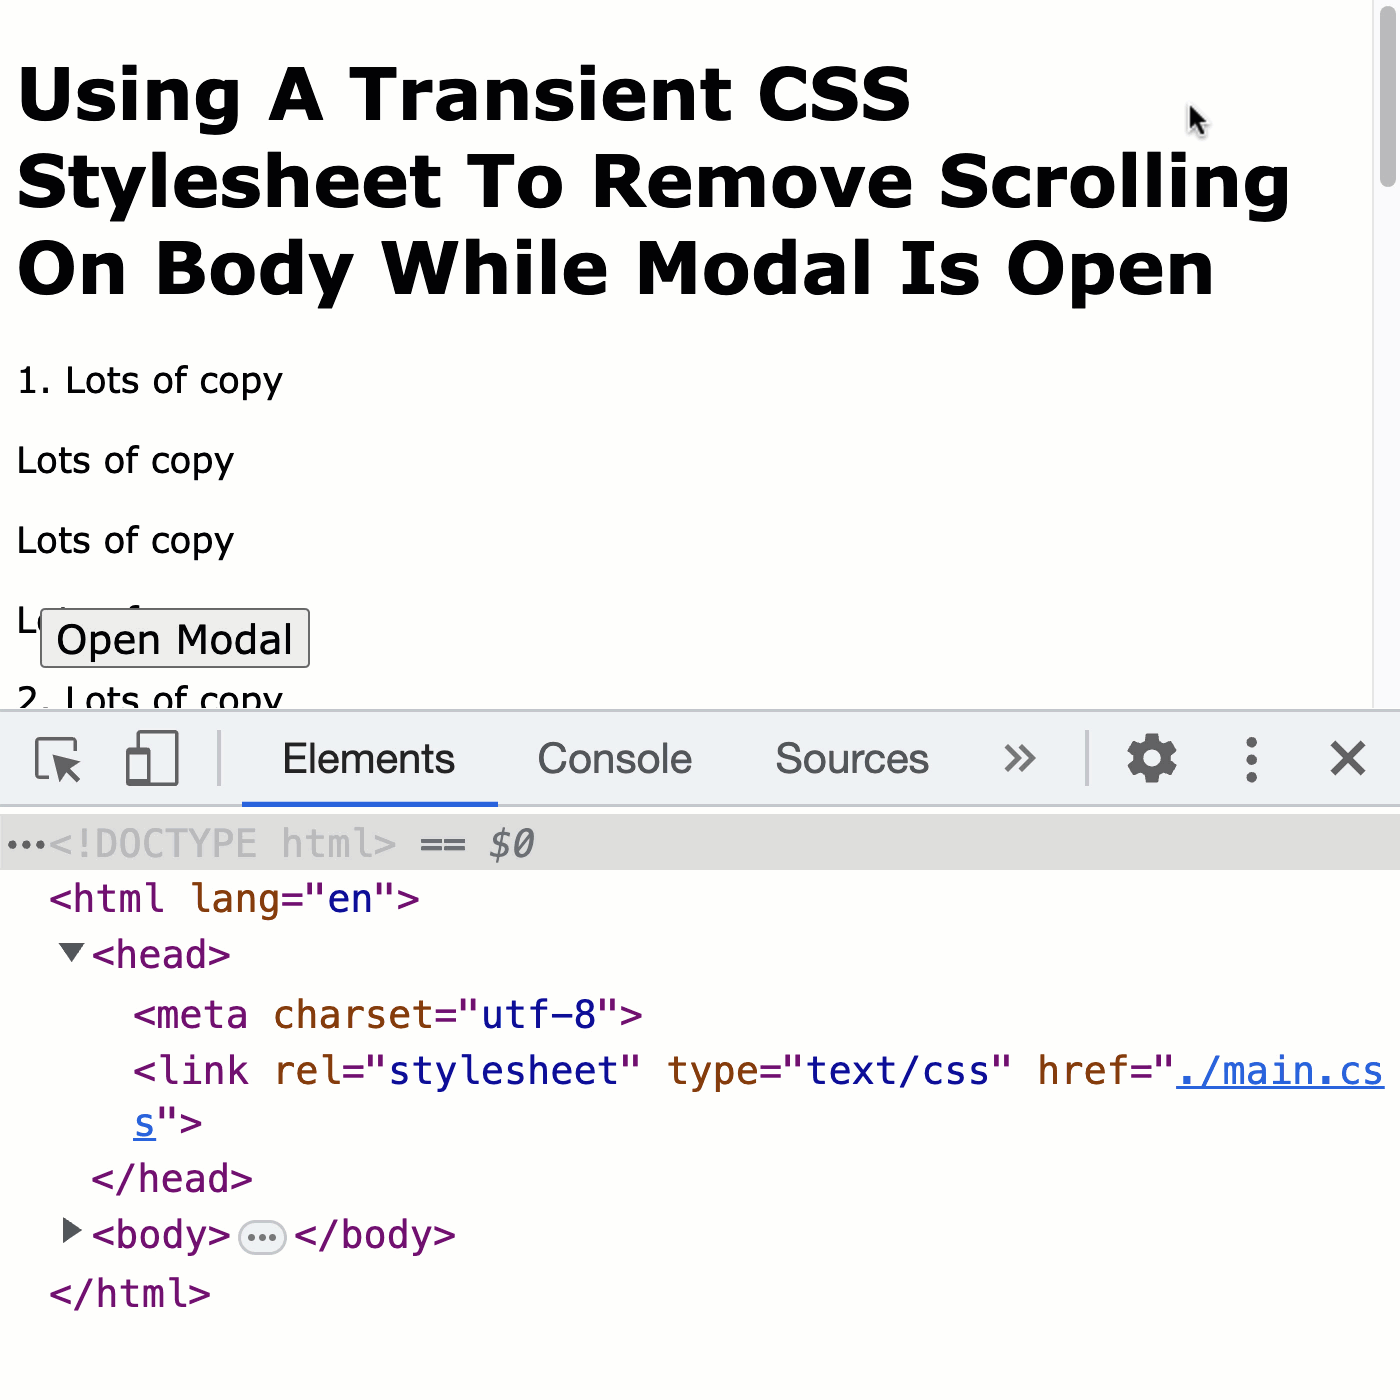 When the modal window is open, the scrollbars disappear on the body (while the underlying page retains its current scroll offset). Then, when the modal window is closed, the scrollbars reappear on the body.